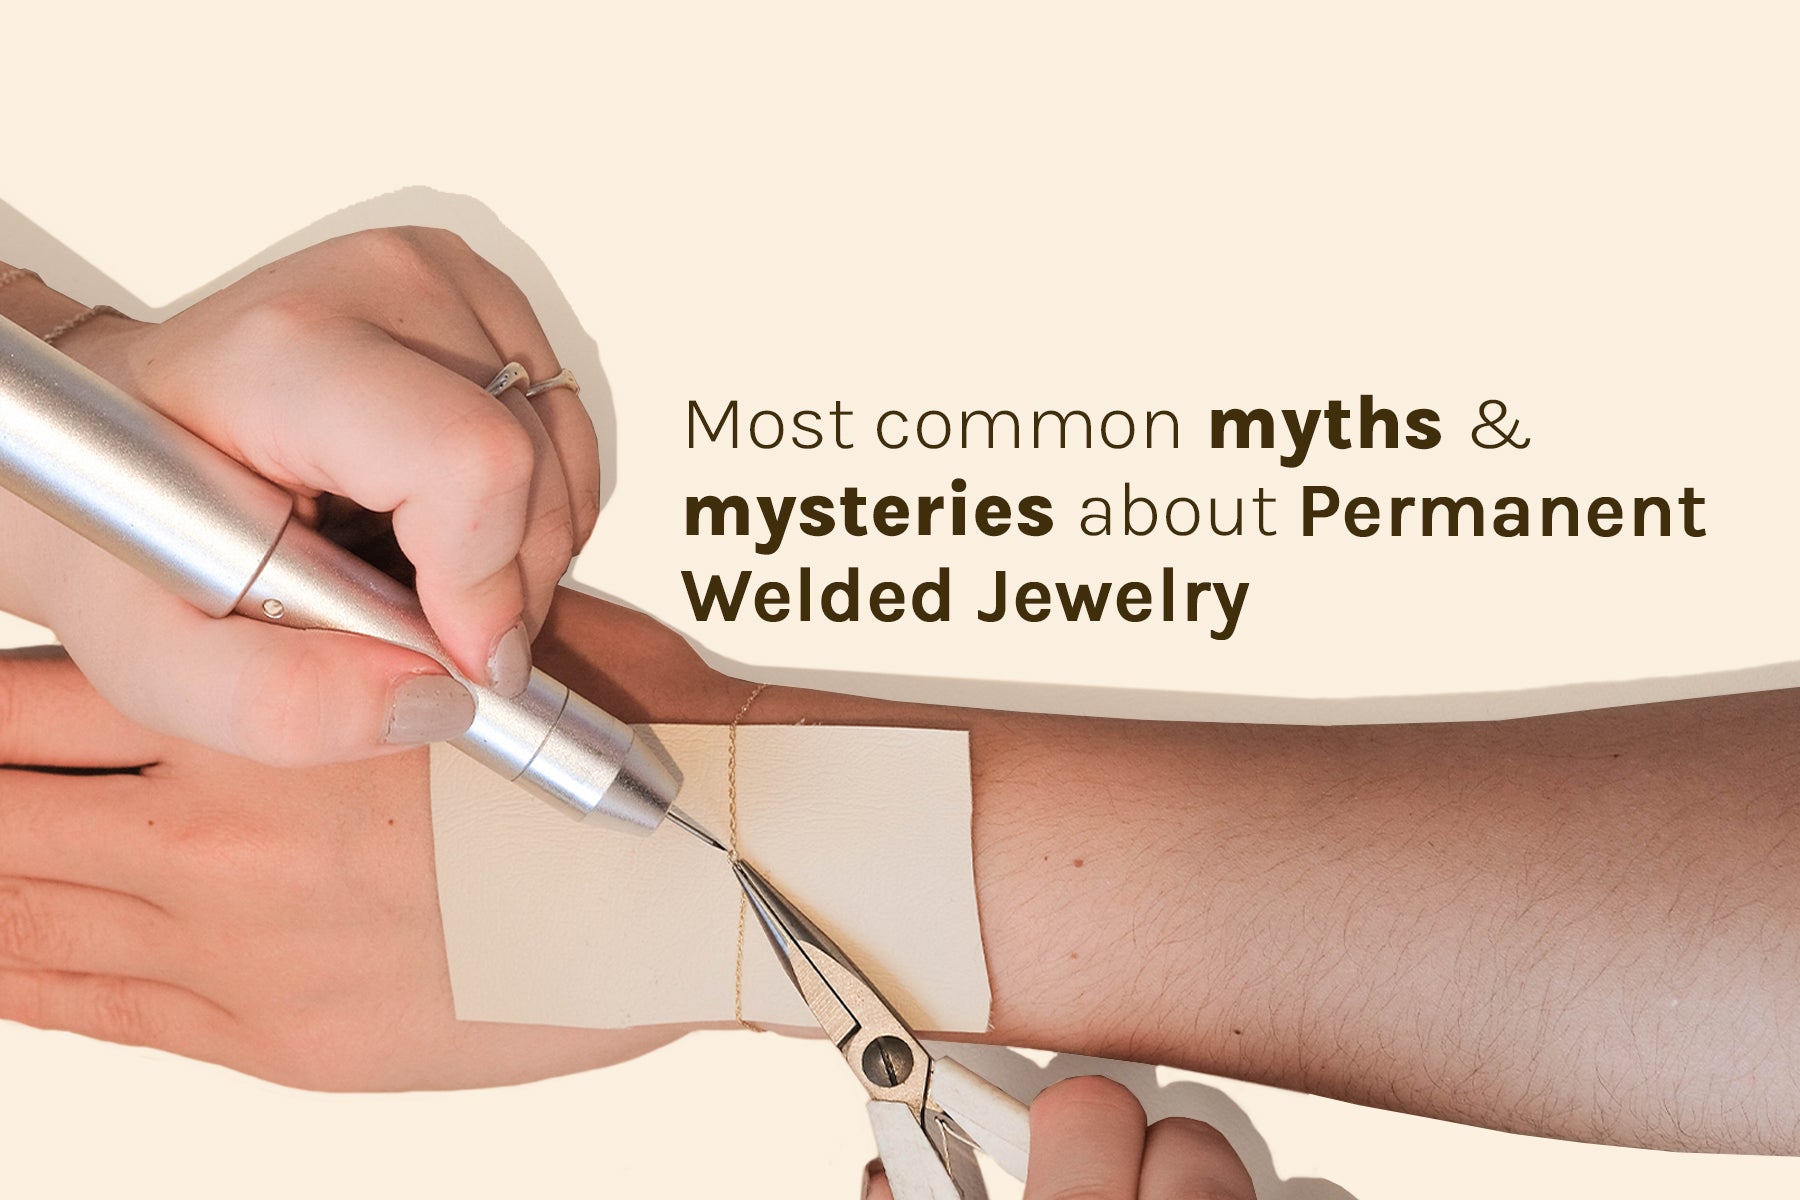 Most Common Myths & Mysteries about Permanent Welded Jewelry